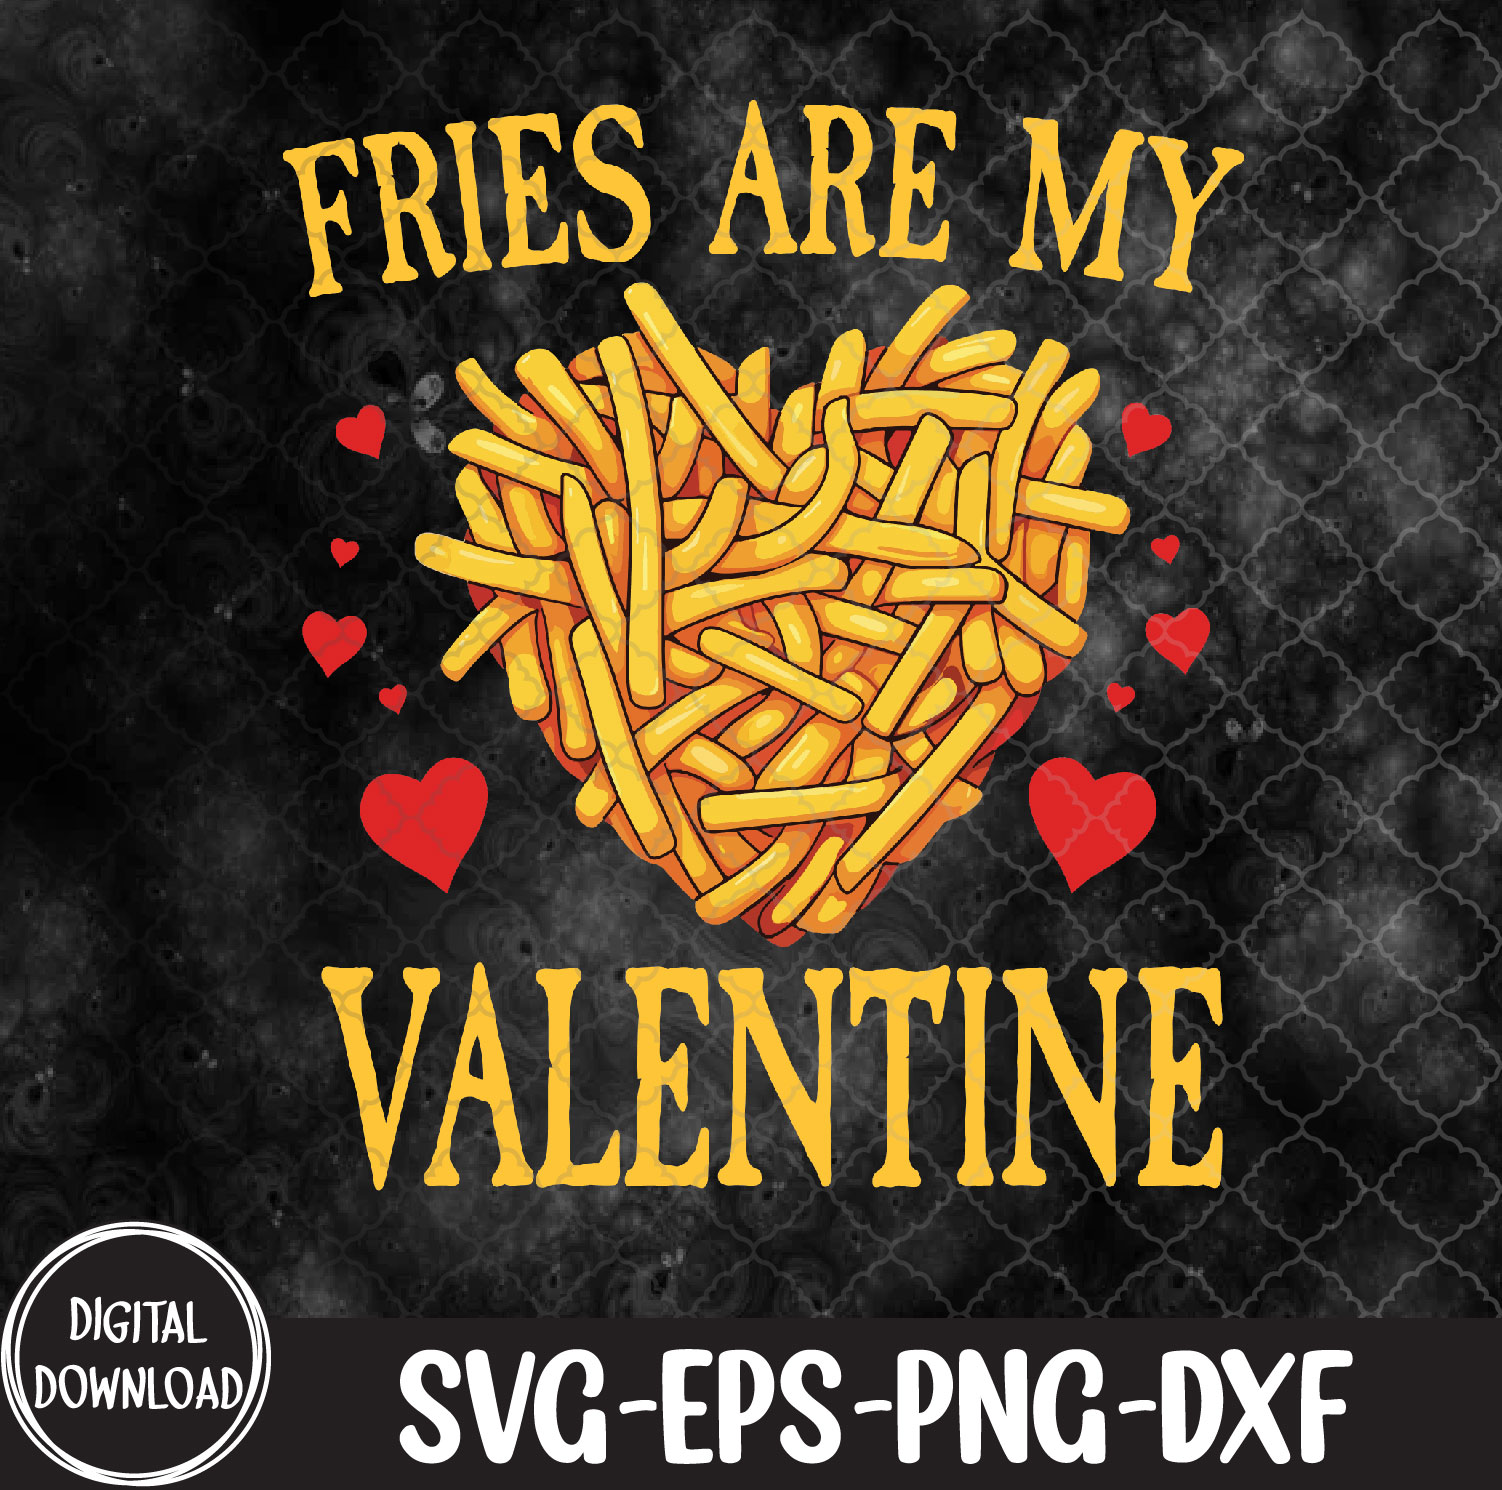 WTMNEW1512 09 12 French Fries are My Valentine Fry Lover Valentines Day svg, Svg, Eps, Png, Dxf